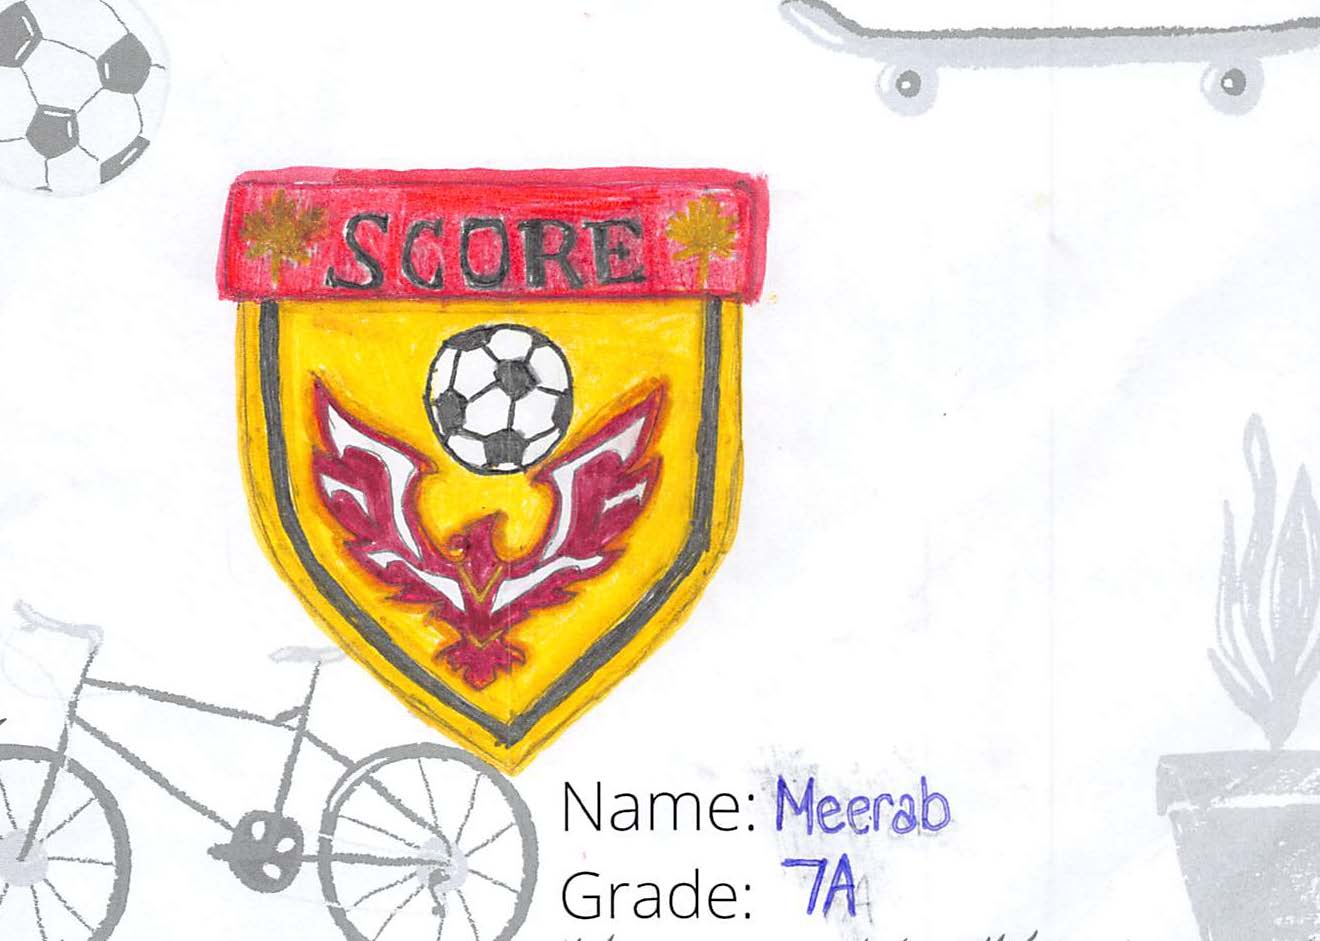 Pencil crayon drawing for the SCORE! logo contest. The drawing is red and yellow and includes a soccer ball and bird.